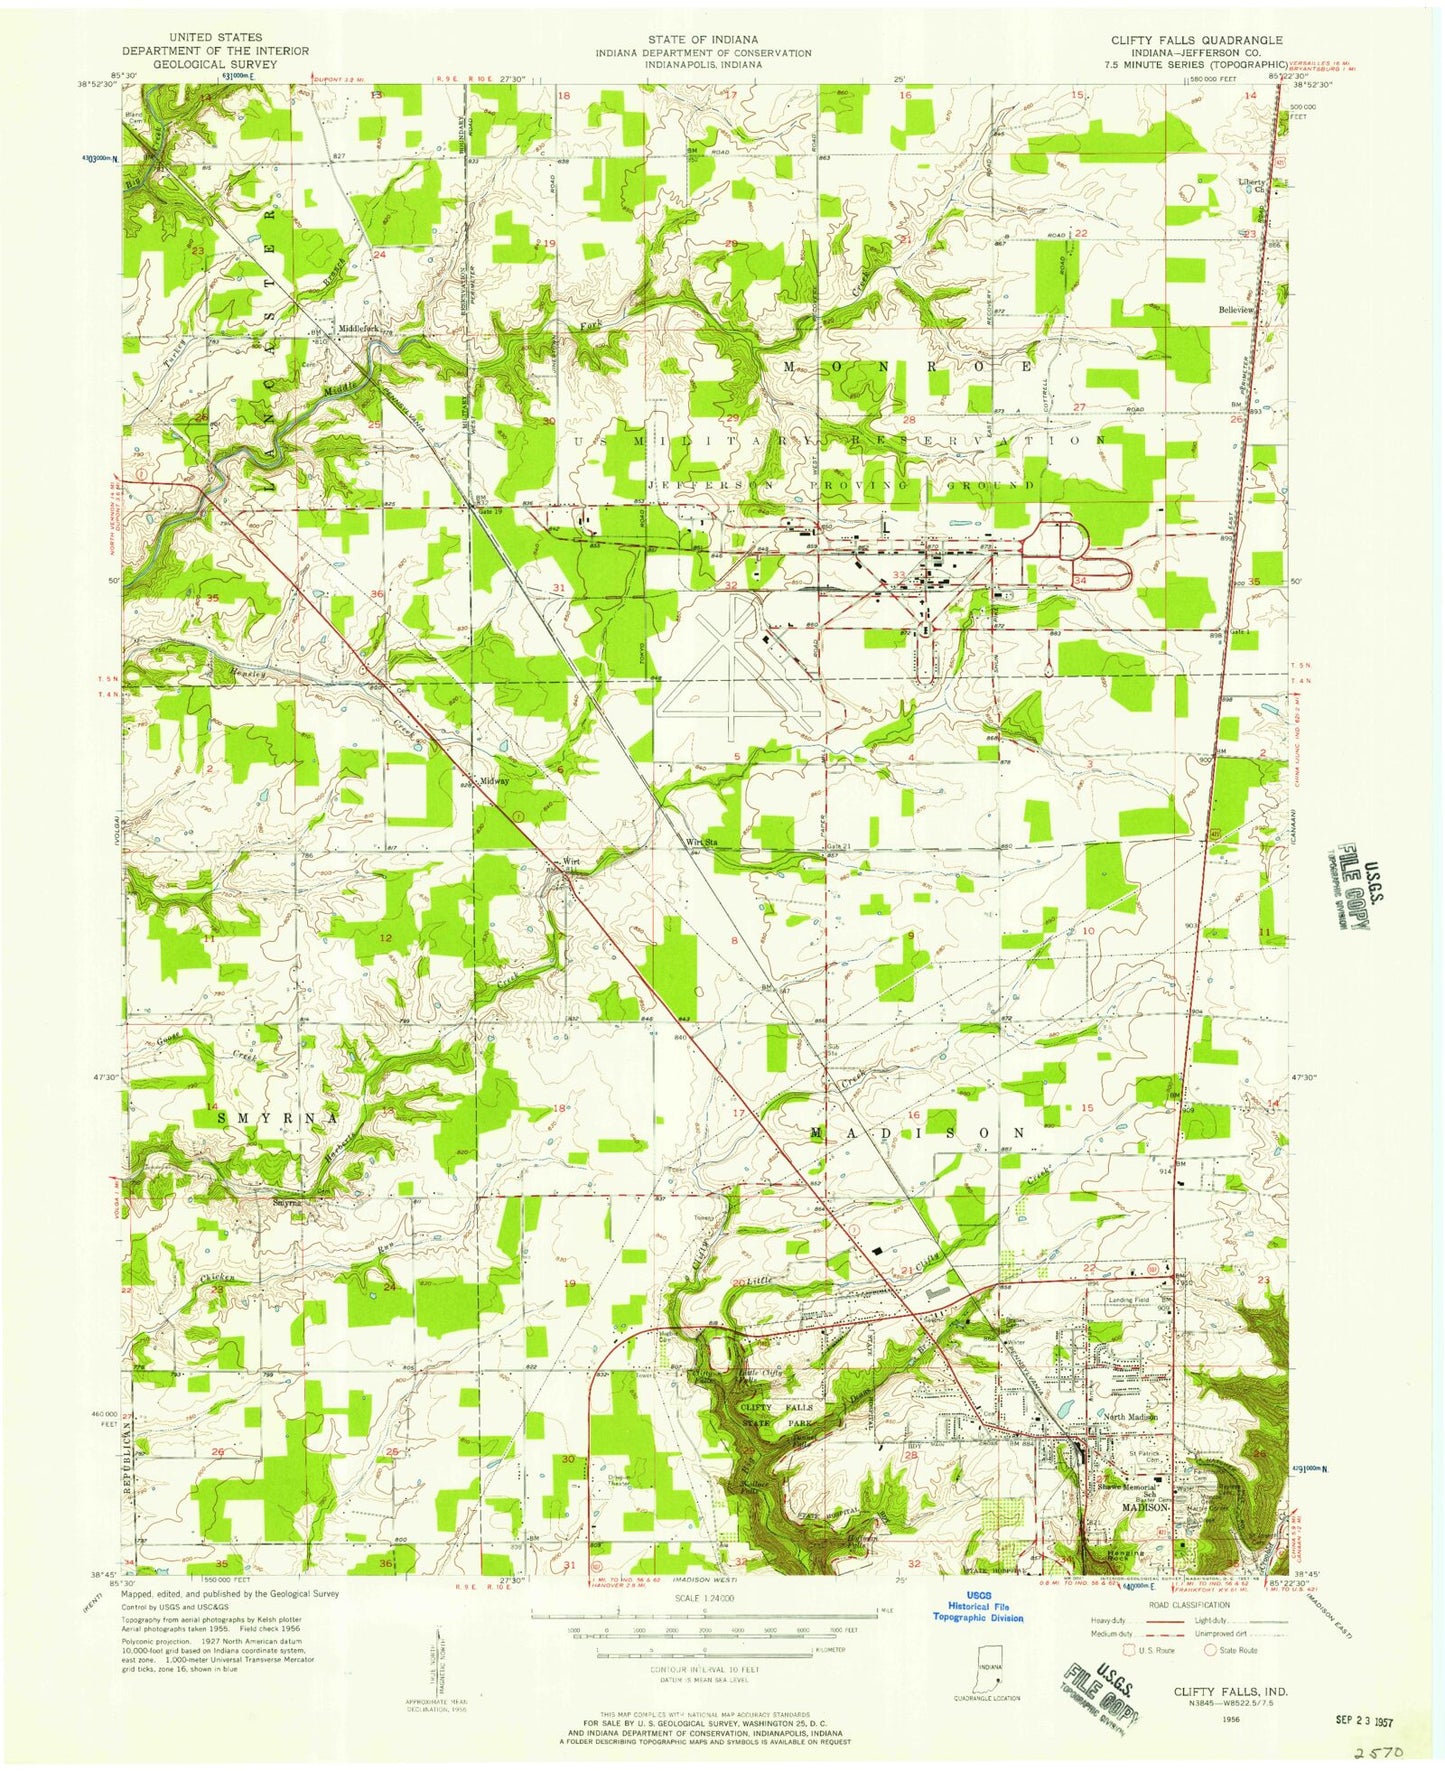 Classic USGS Clifty Falls Indiana 7.5'x7.5' Topo Map Image